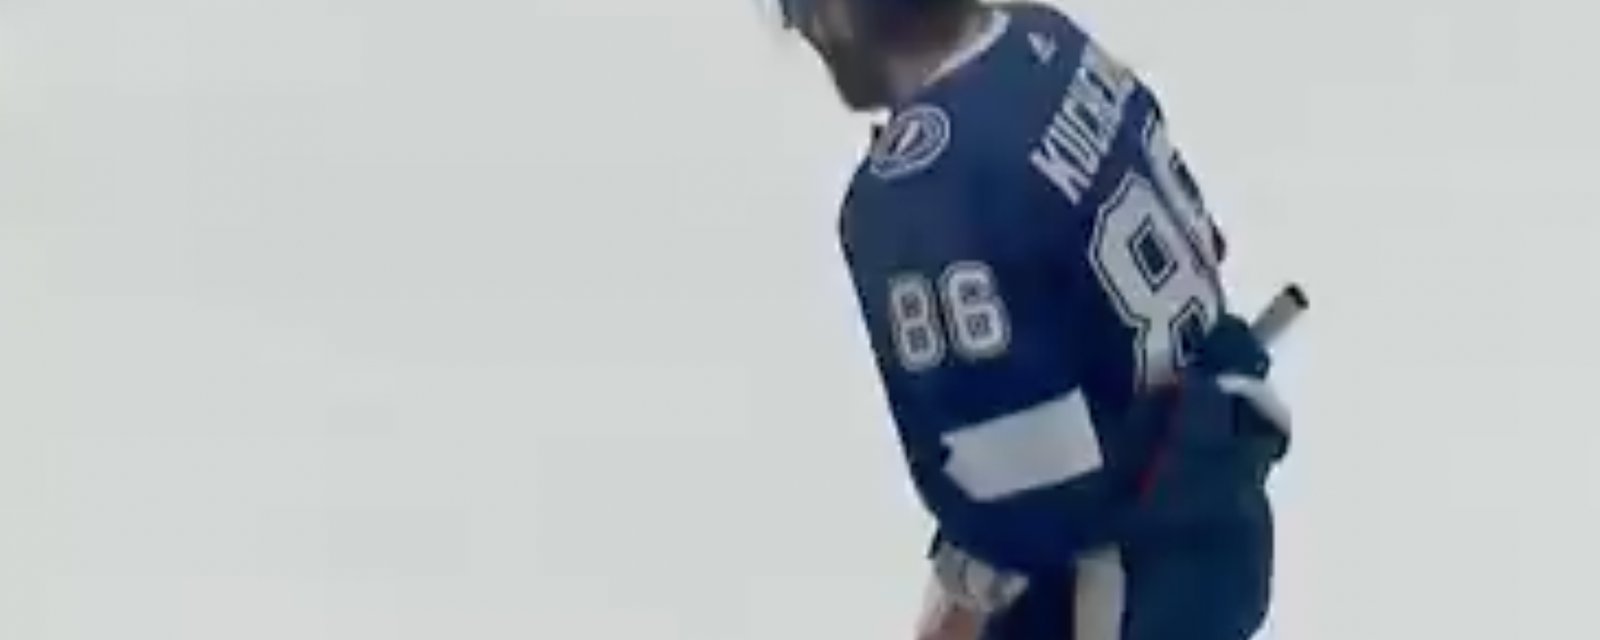 Kucherov has fans worried during TV timeout in first period of Game 7 